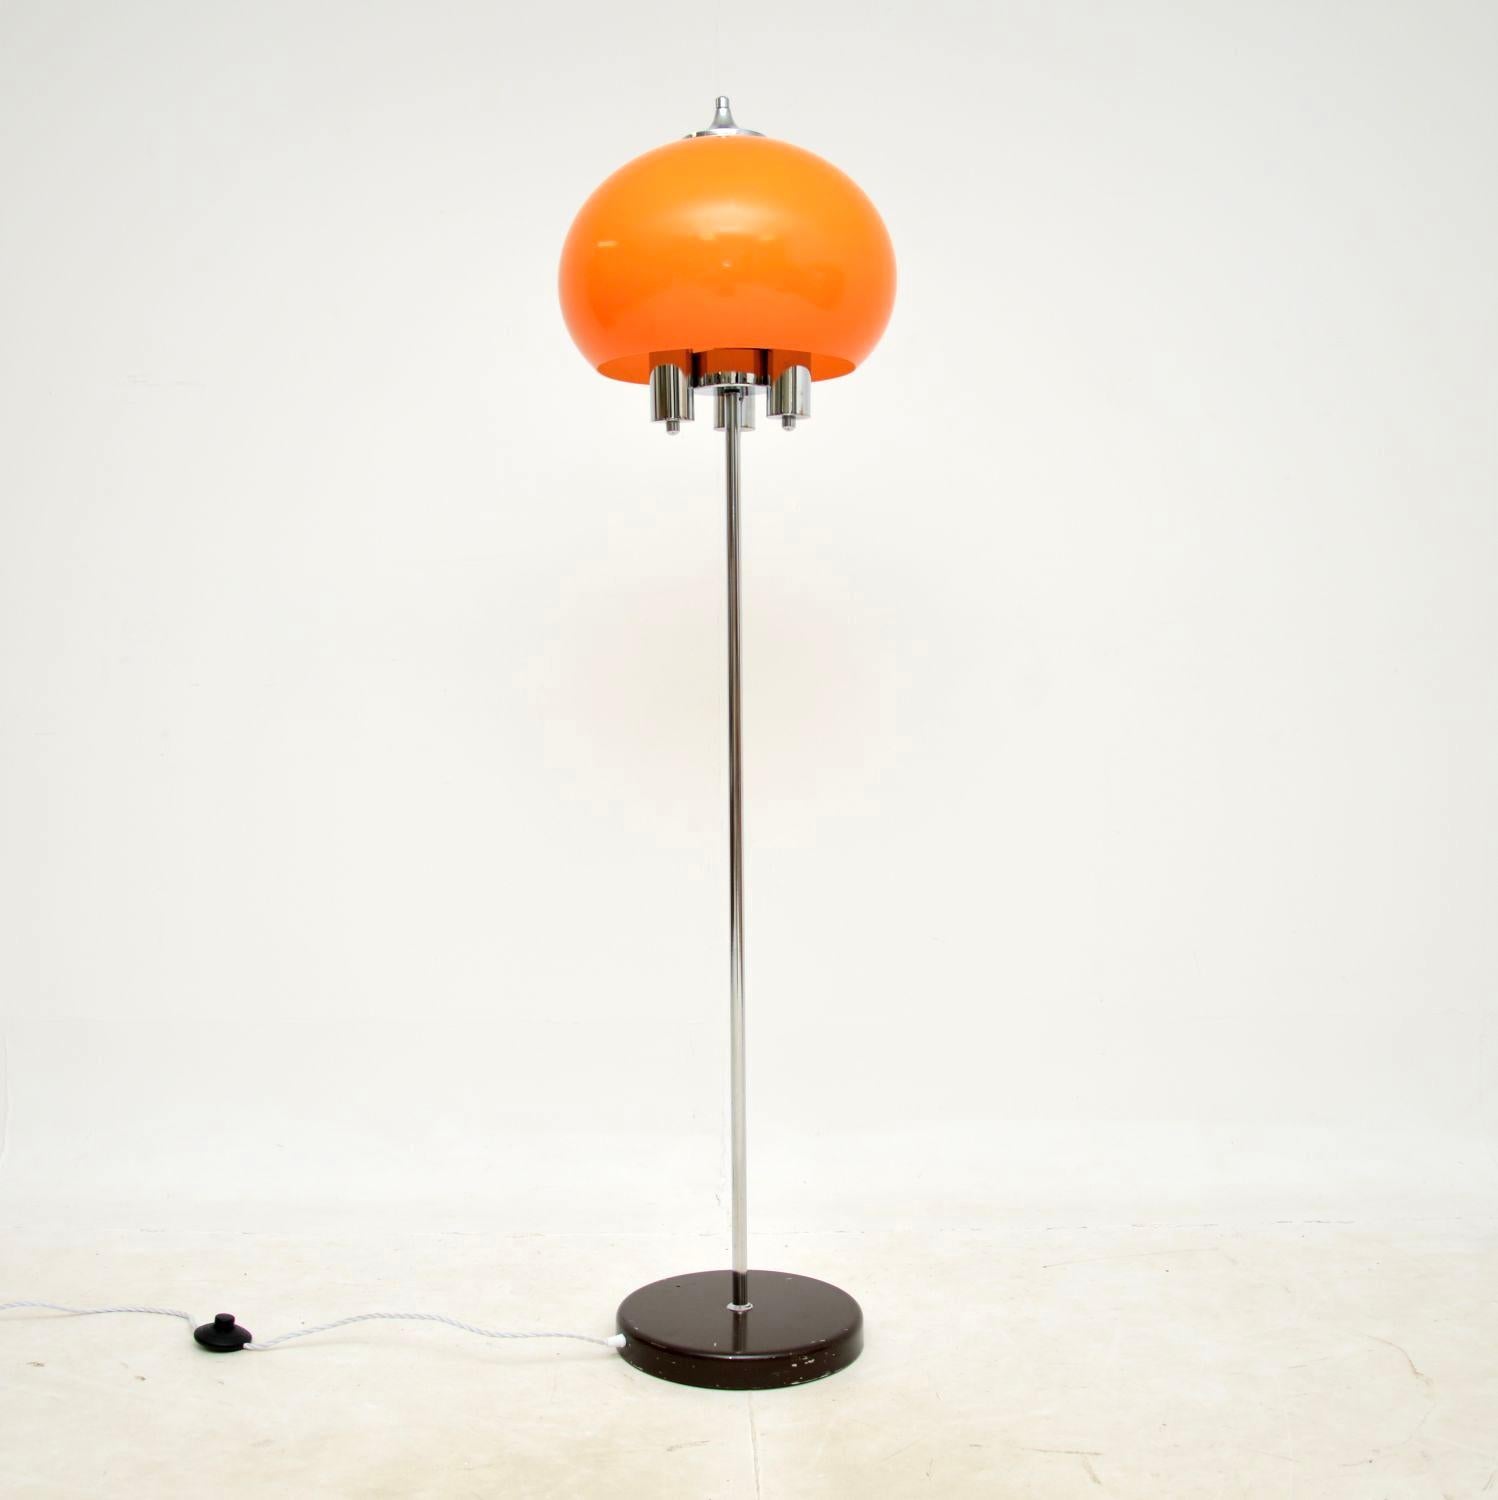 A stylish and very well made 1970’s vintage Italian chrome floor lamp.

The chrome frame is of amazing quality, with three bulb holders. There is a fantastic orange acrylic shade which is beautifully rounded, and compliments the chrome very